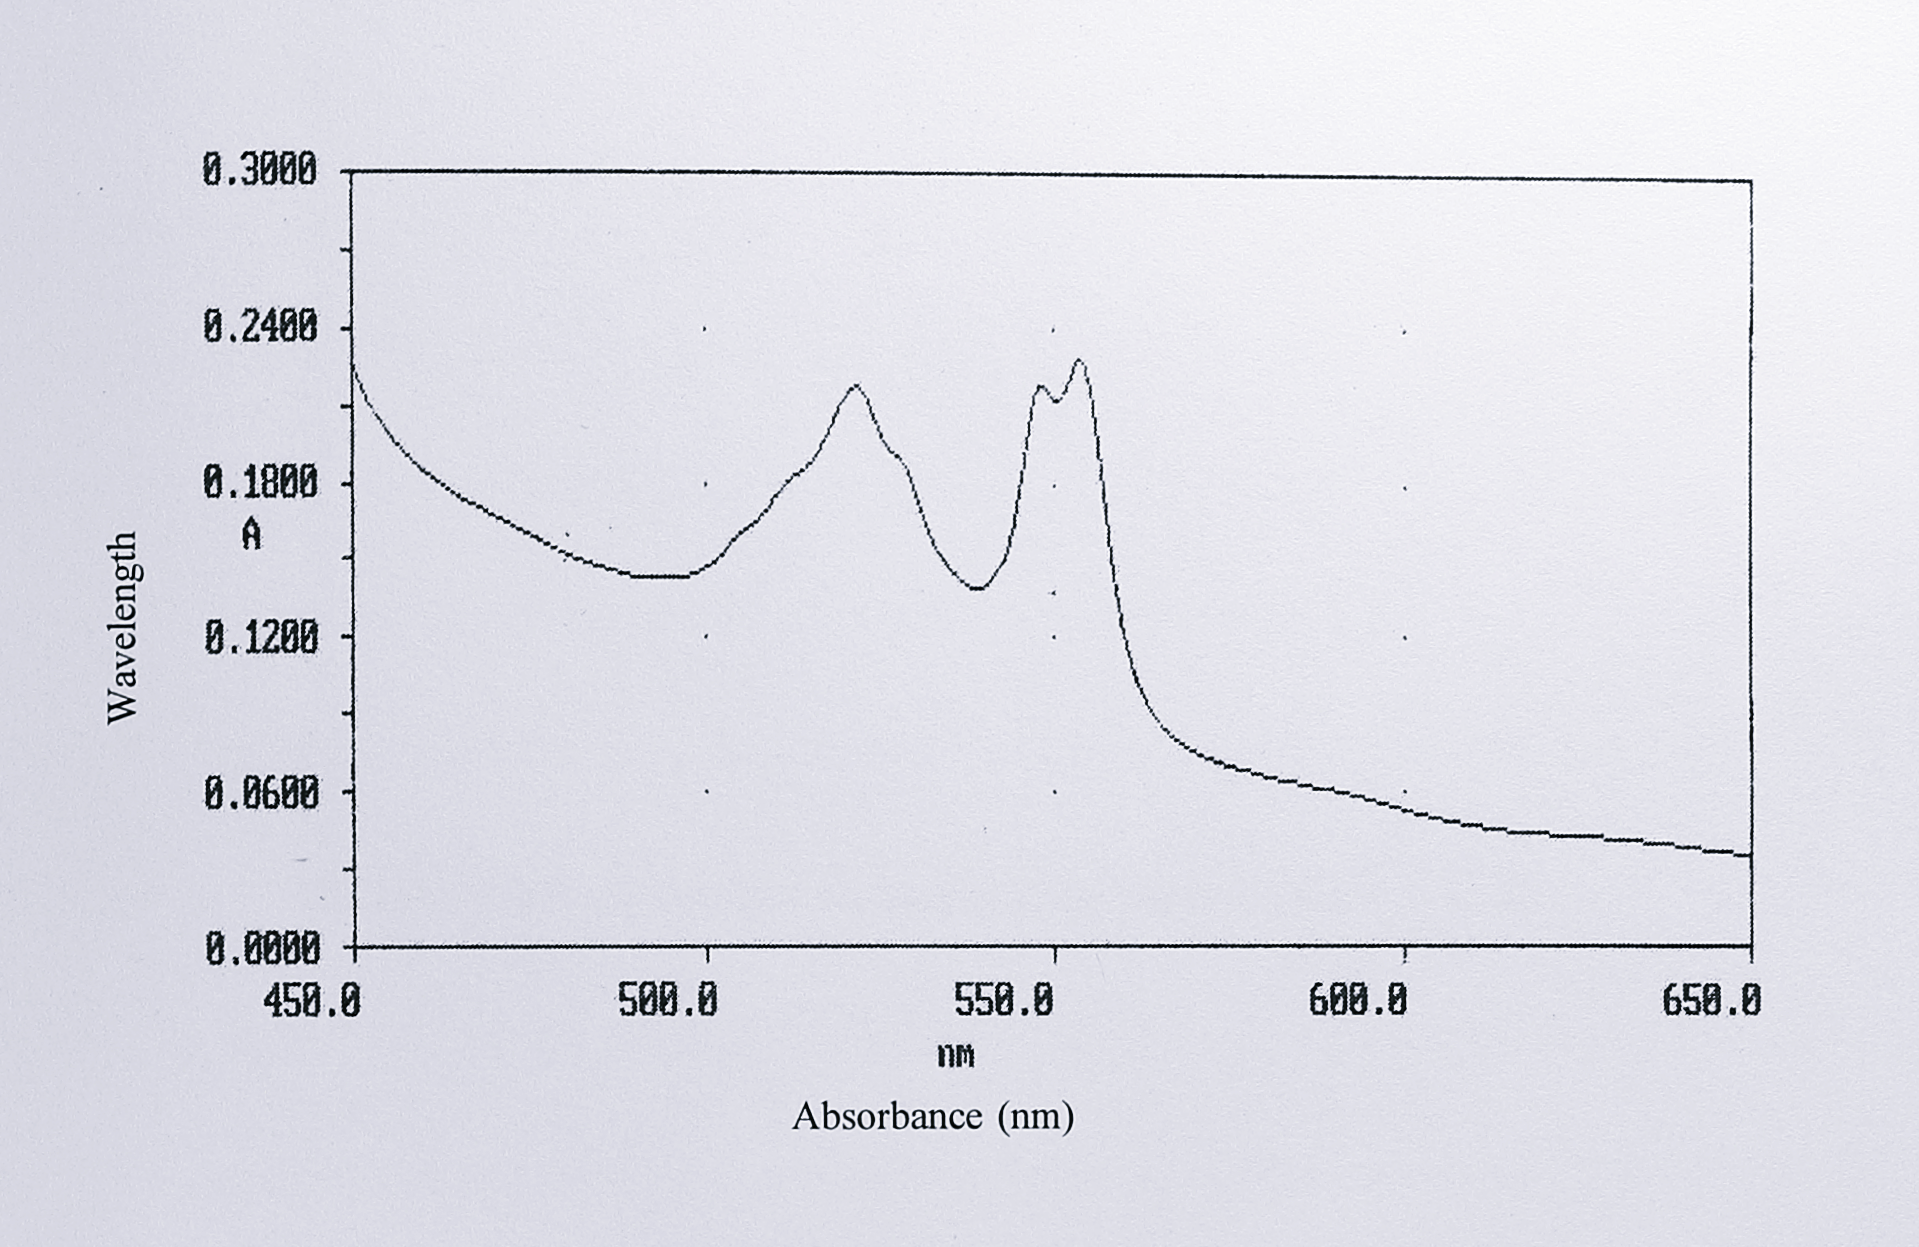 Visible spectrum of soluble extract from _E. coli_ [pMMBSE] grown anaerobically and induced with 1 mM IPTG. 1 ml of soluble extract was prepared from 50 ml of cells and used directly for spectroscopy in 50mM Tris-HCl, pH 8.0. Absorbance maxima are at 416 (not shown), 522, 548 and 554 nm.